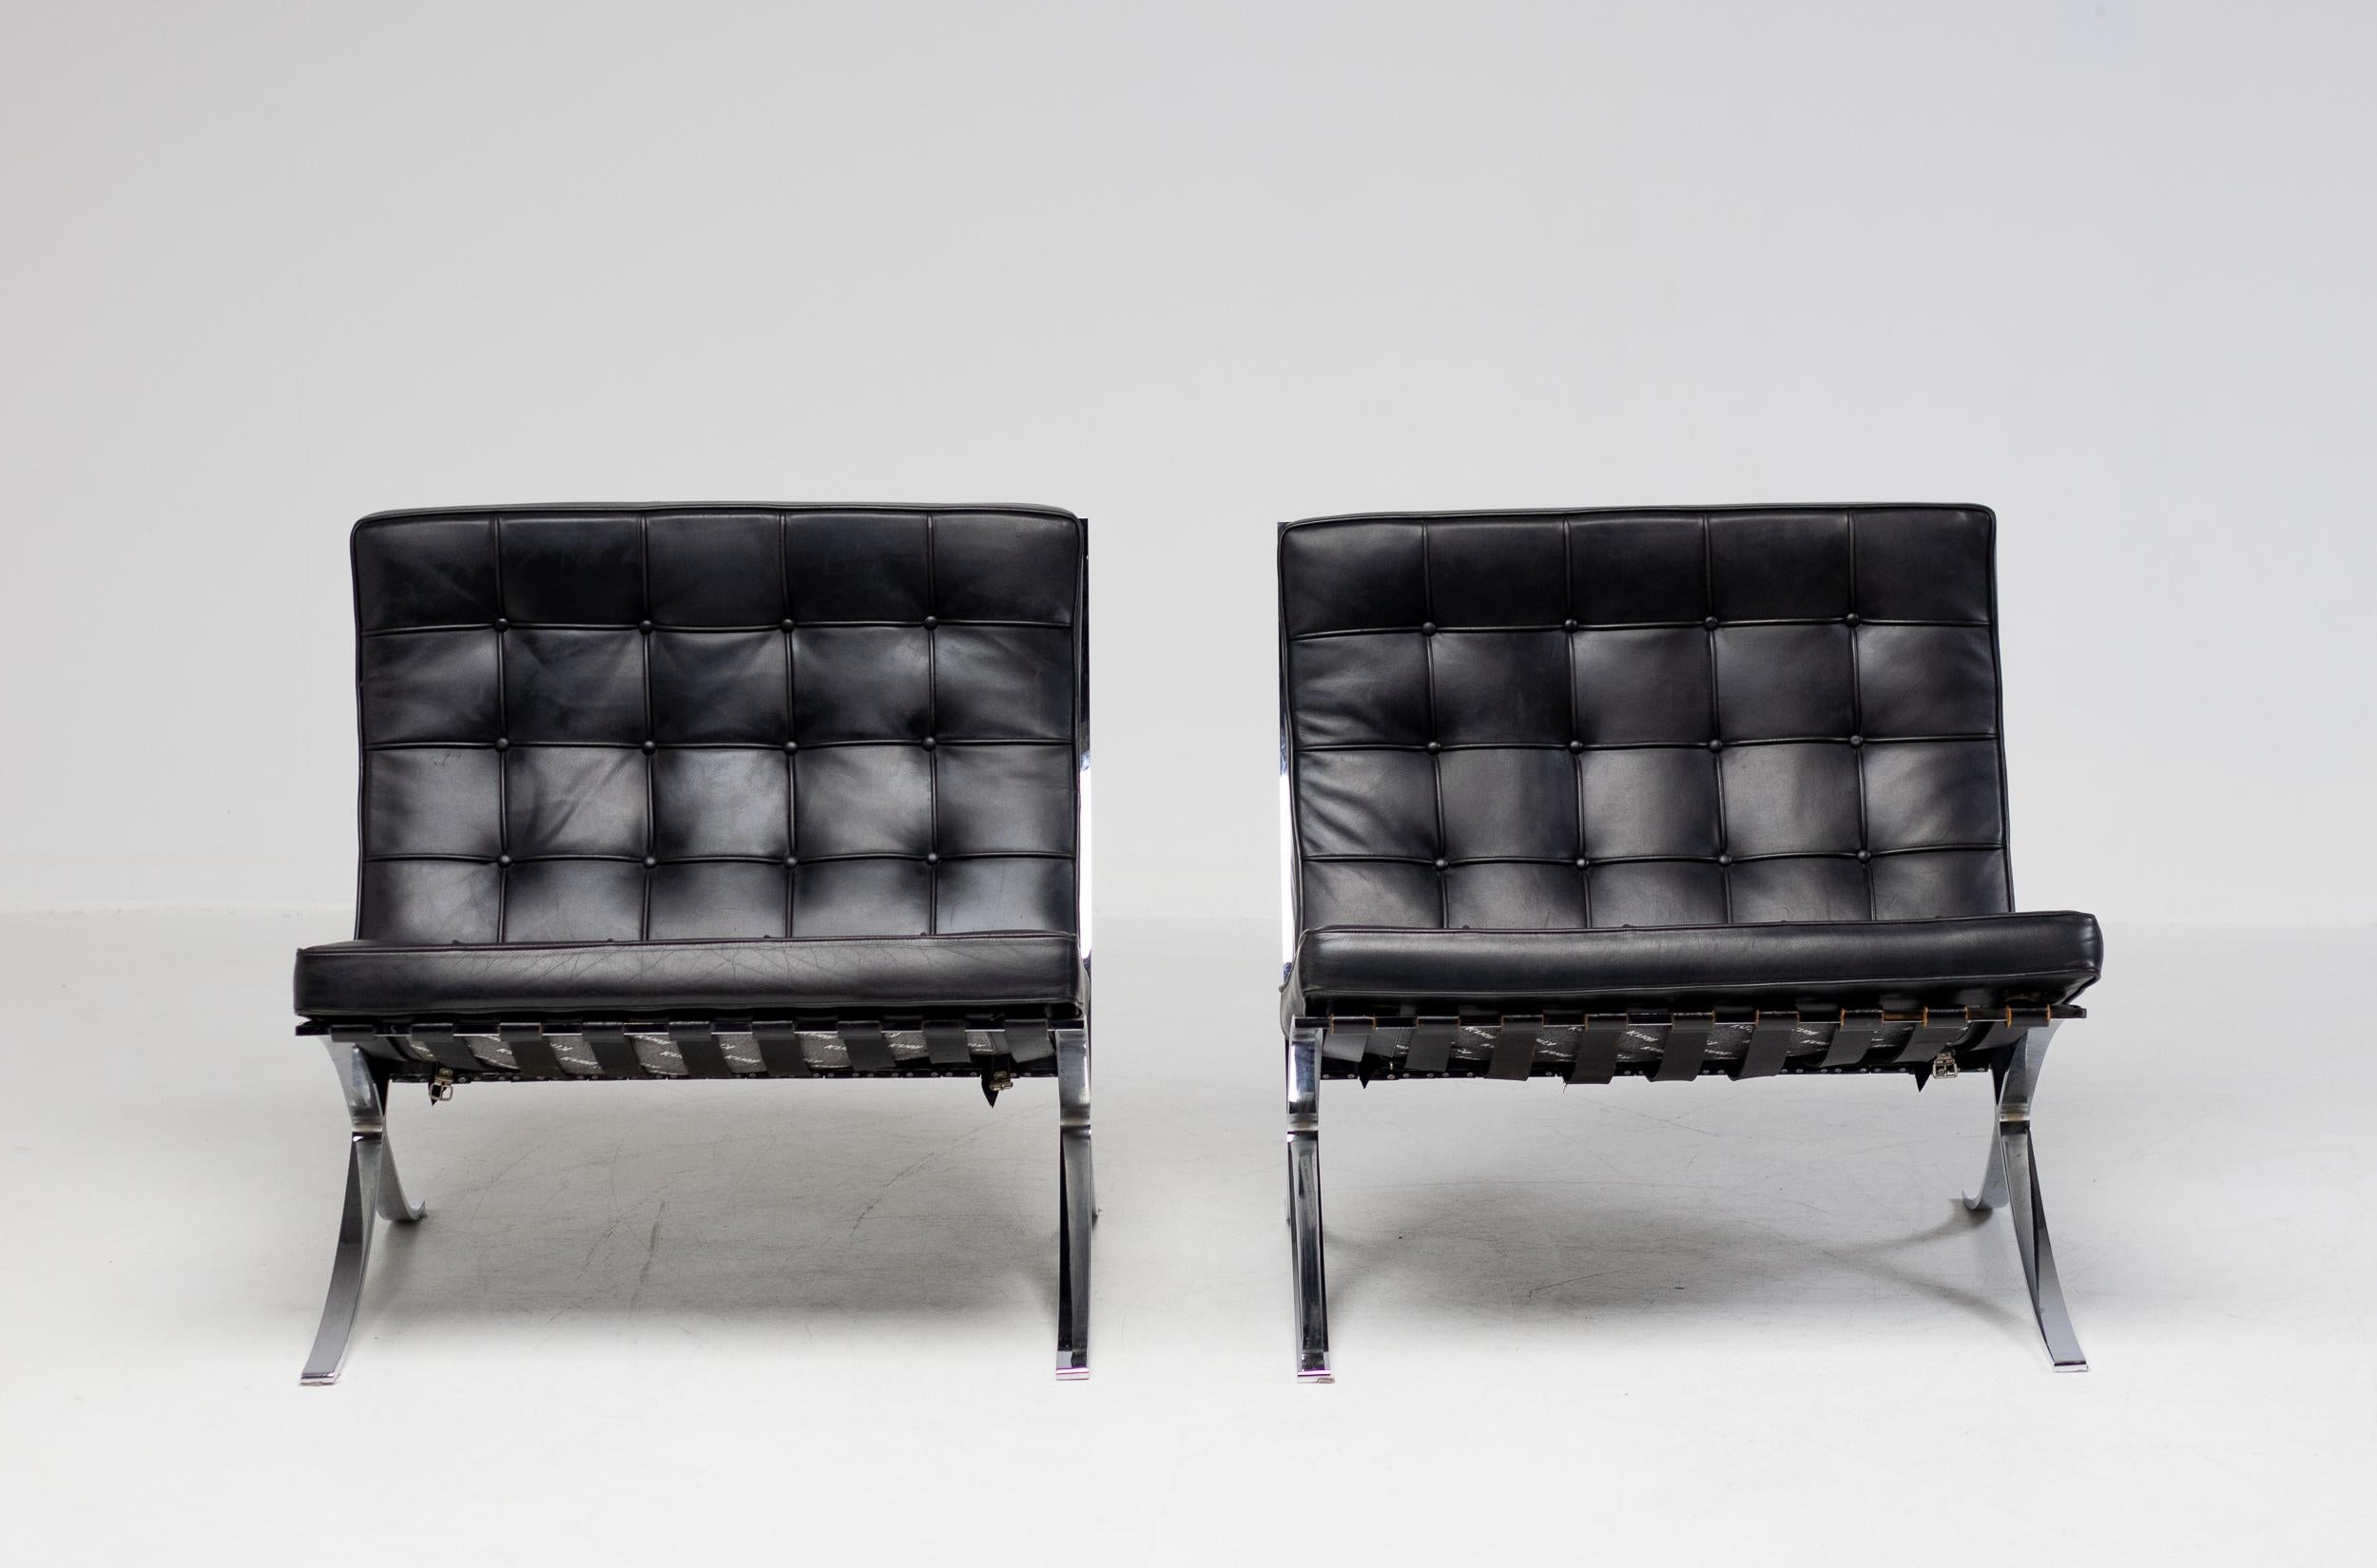 Pair of Barcelona chairs by Mies Van der Rohe for Knoll International in black leather.
Engraved with signature in the frame and marked with Knoll logo at the bottom of the cushions.
Wonderful vintage condition.
Priced as a pair.

One of the most